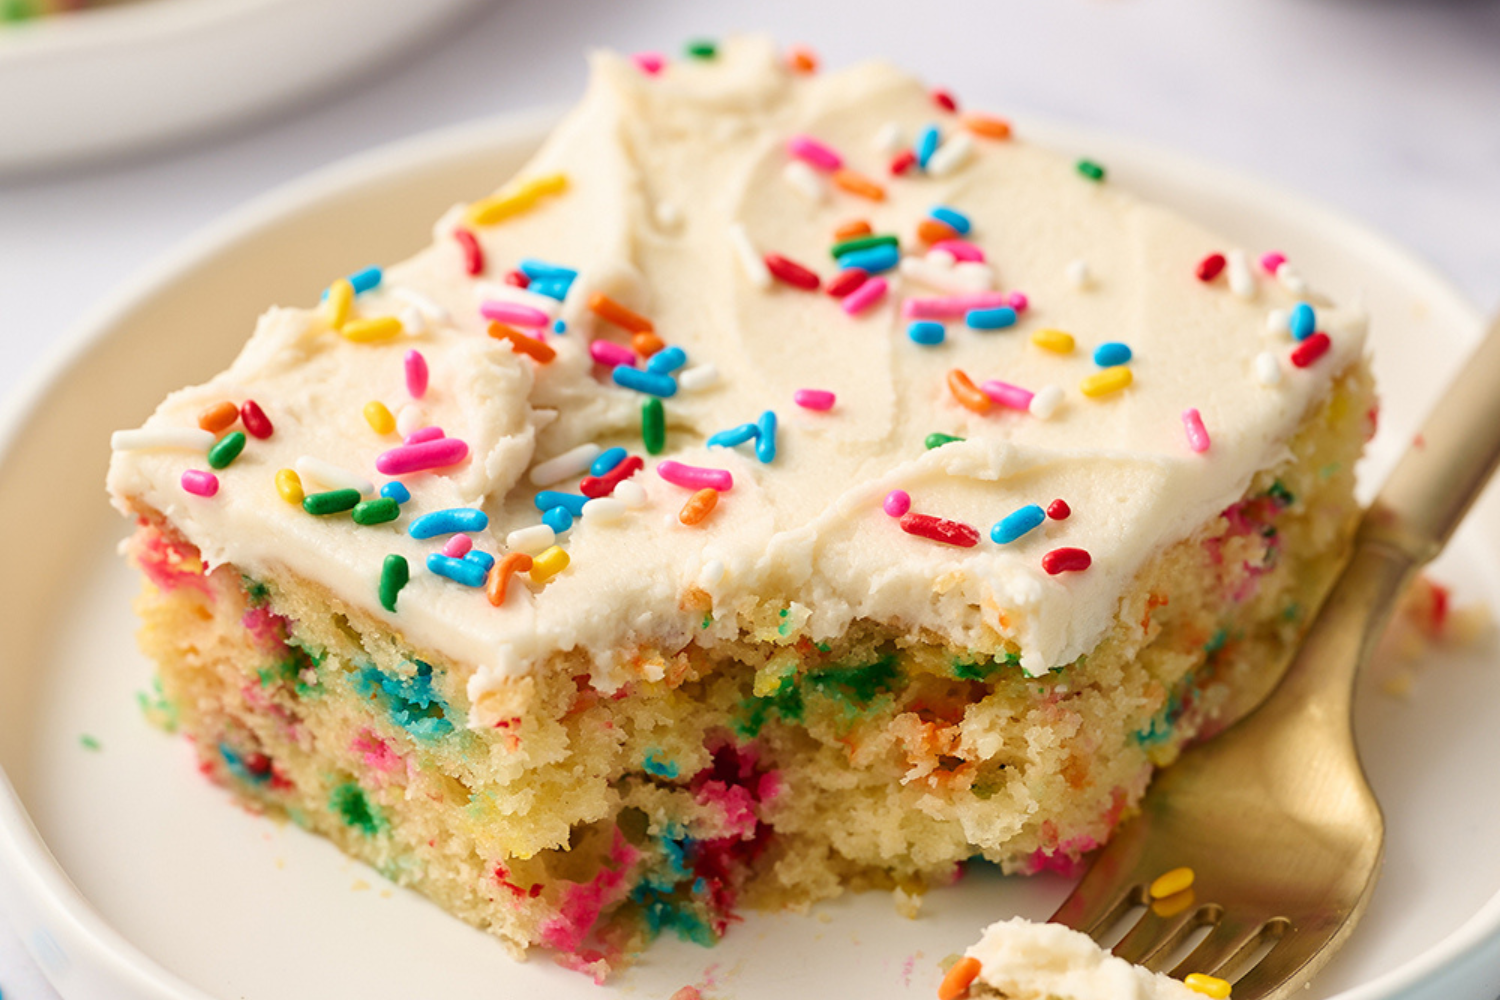 a slice of funfetti cake with a bite taken out.